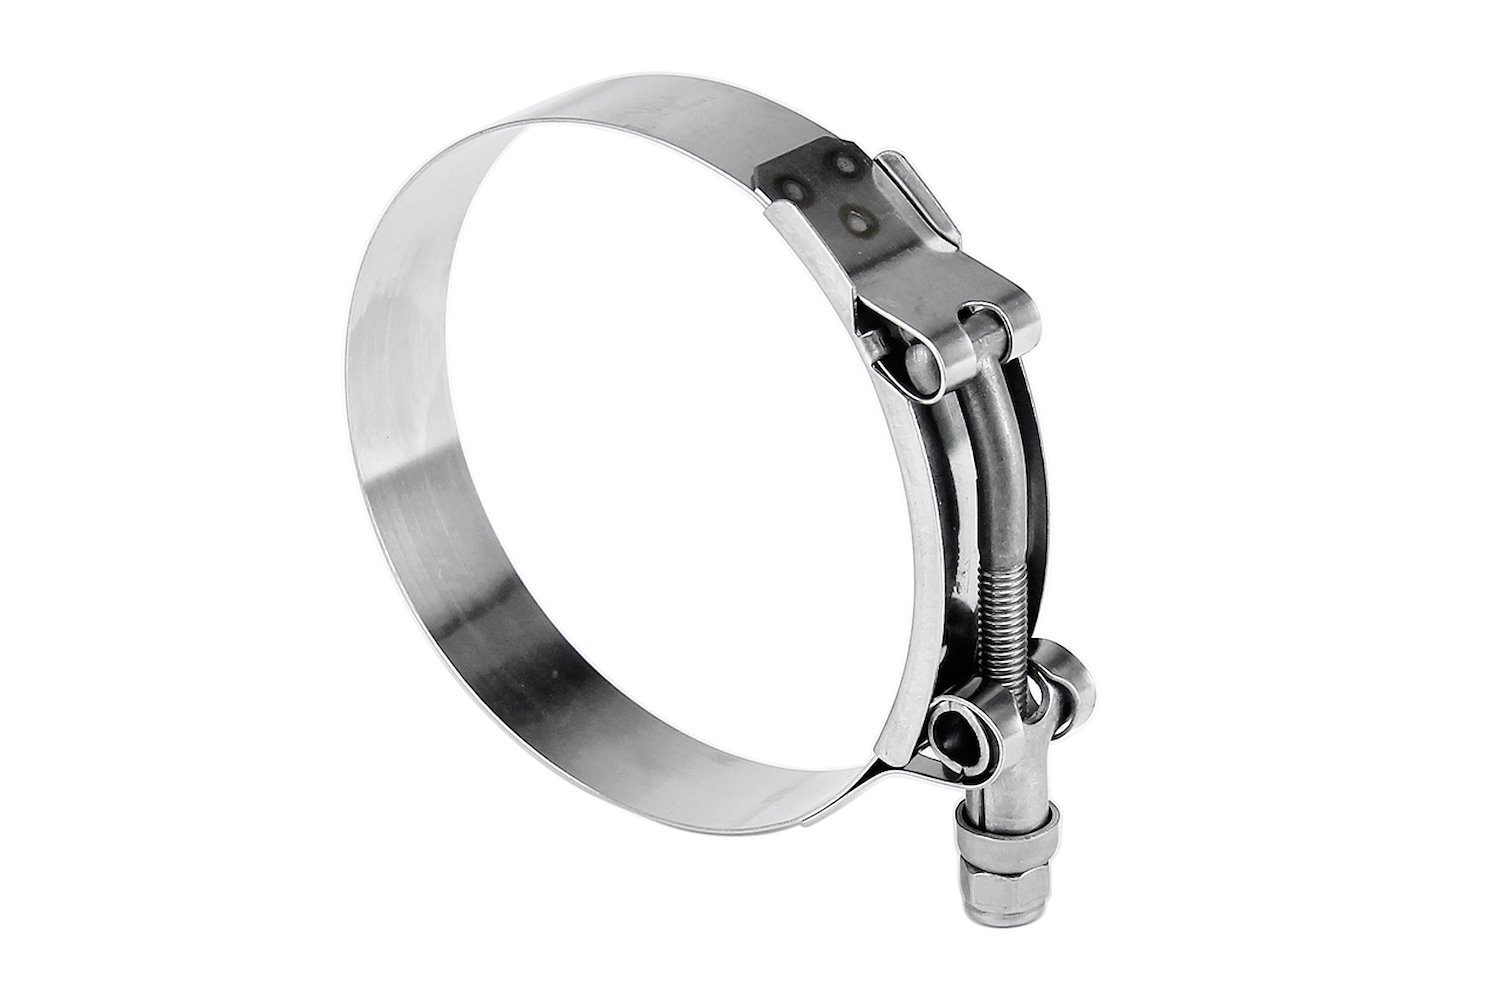 316-SSTC-86-94 100-Percent Marine Grade Stainless Steel T-Bolt Hose Clamp, Size #80, Range: 3.39 in.- 3.7 in.